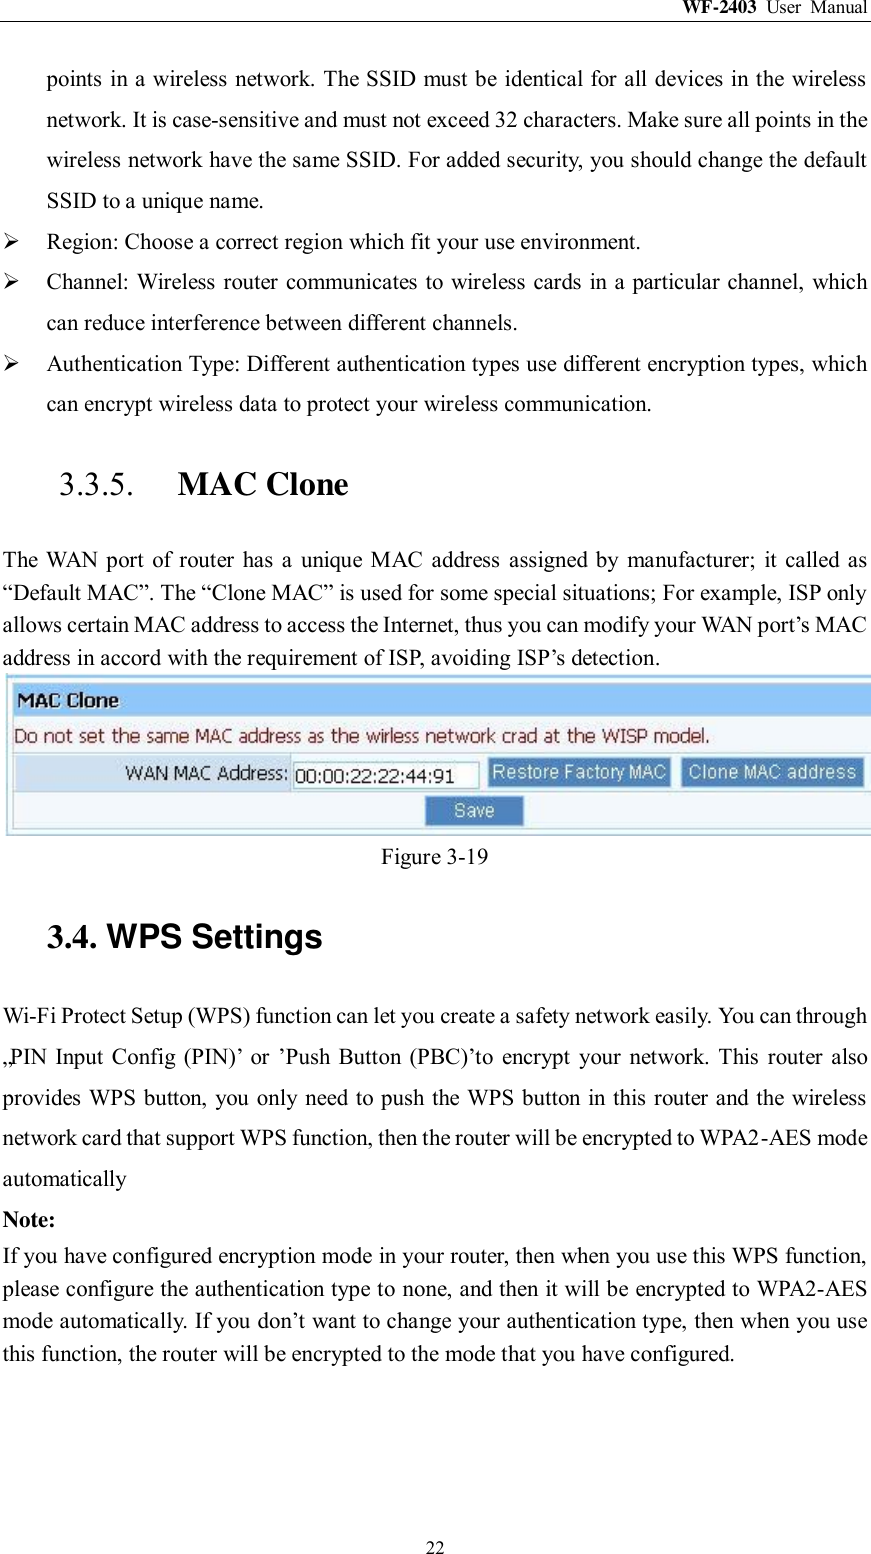 WF-2403  User  Manual  22 points in a wireless network. The SSID must be identical for all devices in the wireless network. It is case-sensitive and must not exceed 32 characters. Make sure all points in the wireless network have the same SSID. For added security, you should change the default SSID to a unique name.  Region: Choose a correct region which fit your use environment.  Channel: Wireless router communicates to wireless cards in a particular channel, which can reduce interference between different channels.  Authentication Type: Different authentication types use different encryption types, which can encrypt wireless data to protect your wireless communication. 3.3.5. MAC Clone The  WAN port  of router  has  a  unique  MAC  address  assigned by  manufacturer;  it  called as “Default MAC”. The “Clone MAC” is used for some special situations; For example, ISP only allows certain MAC address to access the Internet, thus you can modify your WAN port‟s MAC address in accord with the requirement of ISP, avoiding ISP‟s detection.  Figure 3-19 3.4. WPS Settings Wi-Fi Protect Setup (WPS) function can let you create a safety network easily. You can through „PIN Input Config (PIN)‟  or  ‟Push  Button (PBC)‟to  encrypt  your network.  This  router also provides WPS button, you only need to push the WPS button in this router and  the wireless network card that support WPS function, then the router will be encrypted to WPA2-AES mode automatically Note: If you have configured encryption mode in your router, then when you use this WPS function, please configure the authentication type to none, and then it will be encrypted to WPA2-AES mode automatically. If you don‟t want to change your authentication type, then when you use this function, the router will be encrypted to the mode that you have configured. 